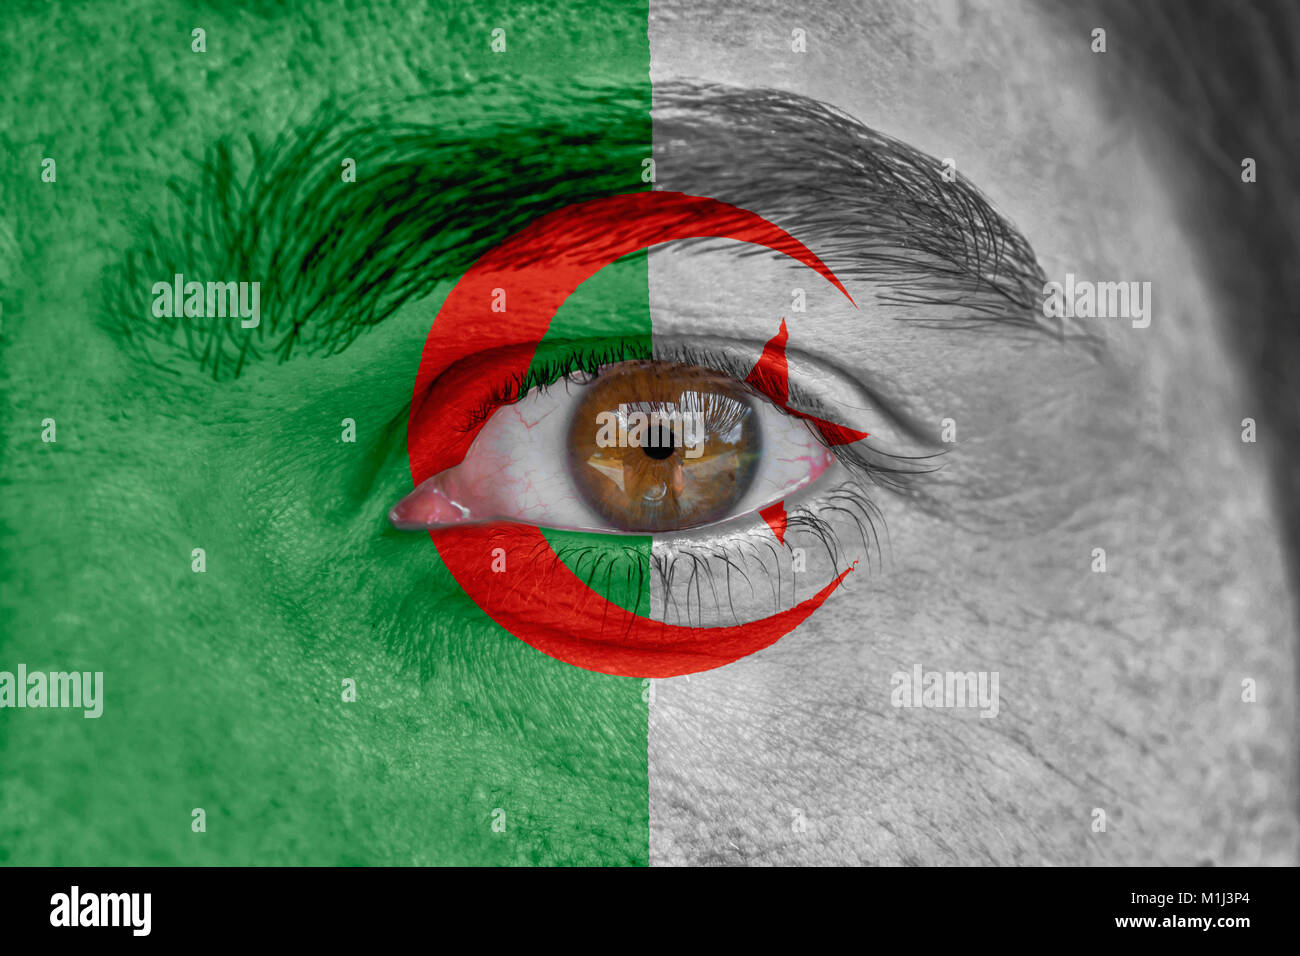 Human face and eye painted with flag of Algeria Stock Photo